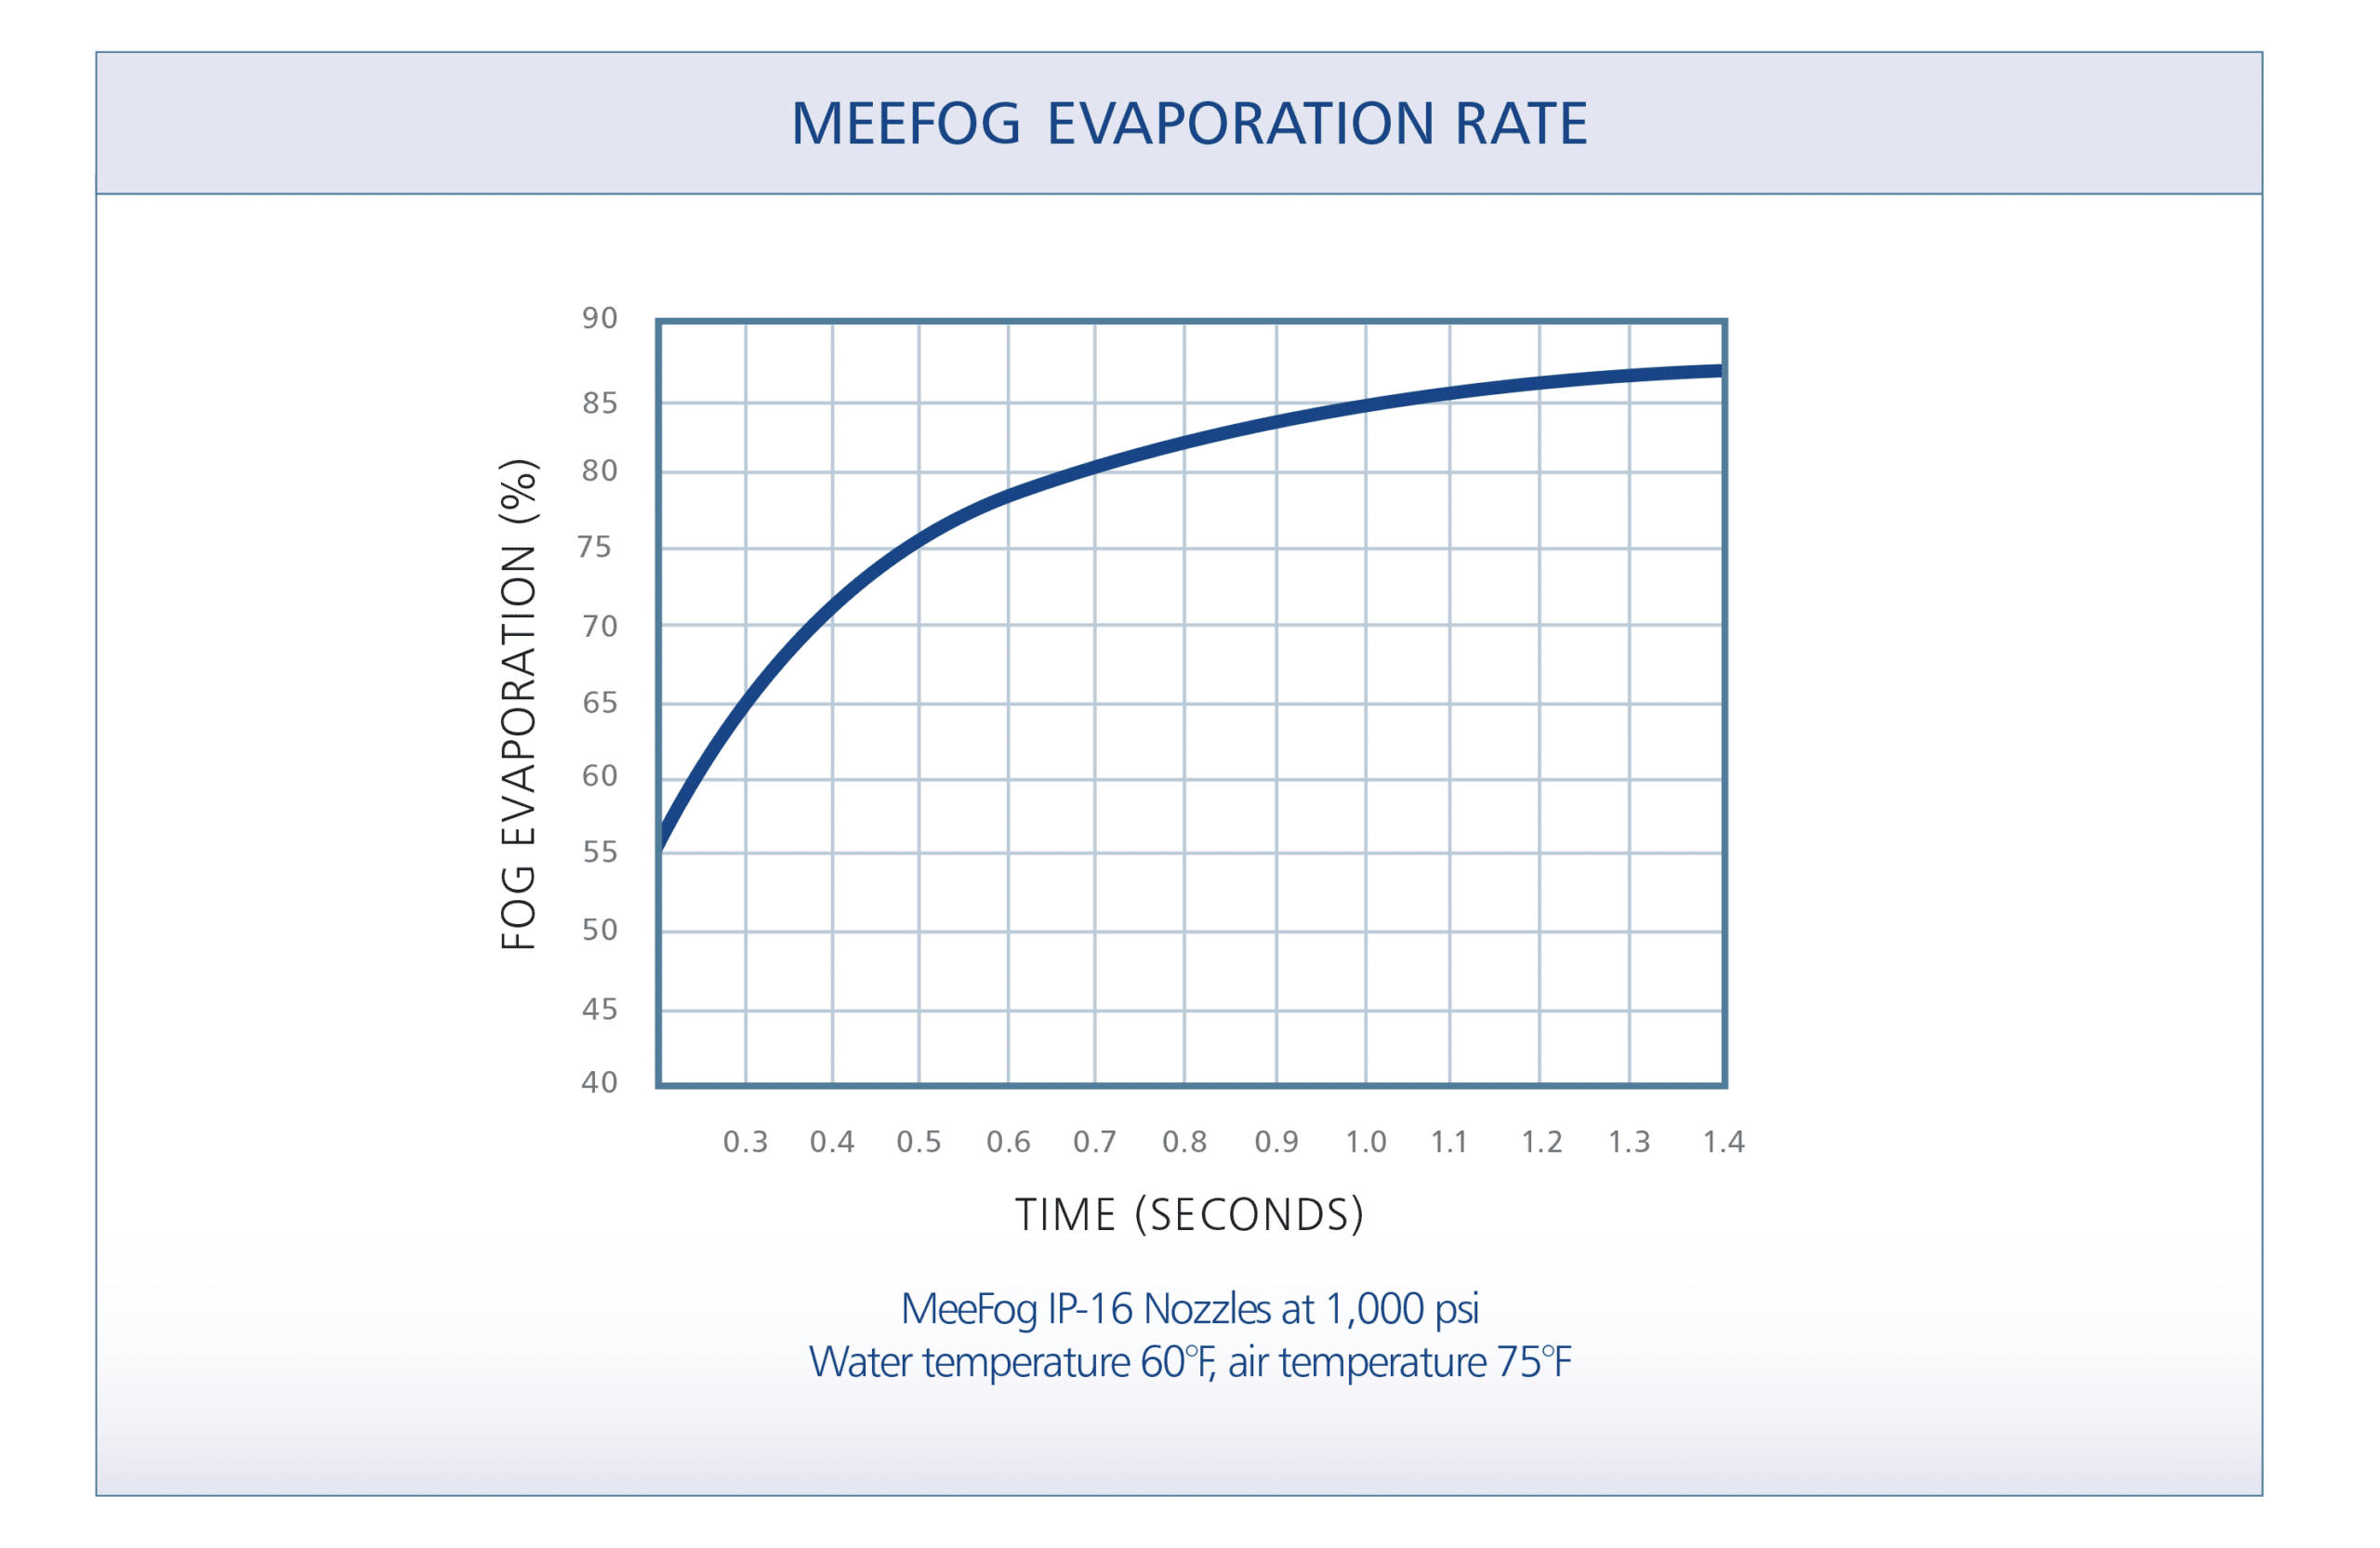 Chart showing the Meefog evaporation rate.